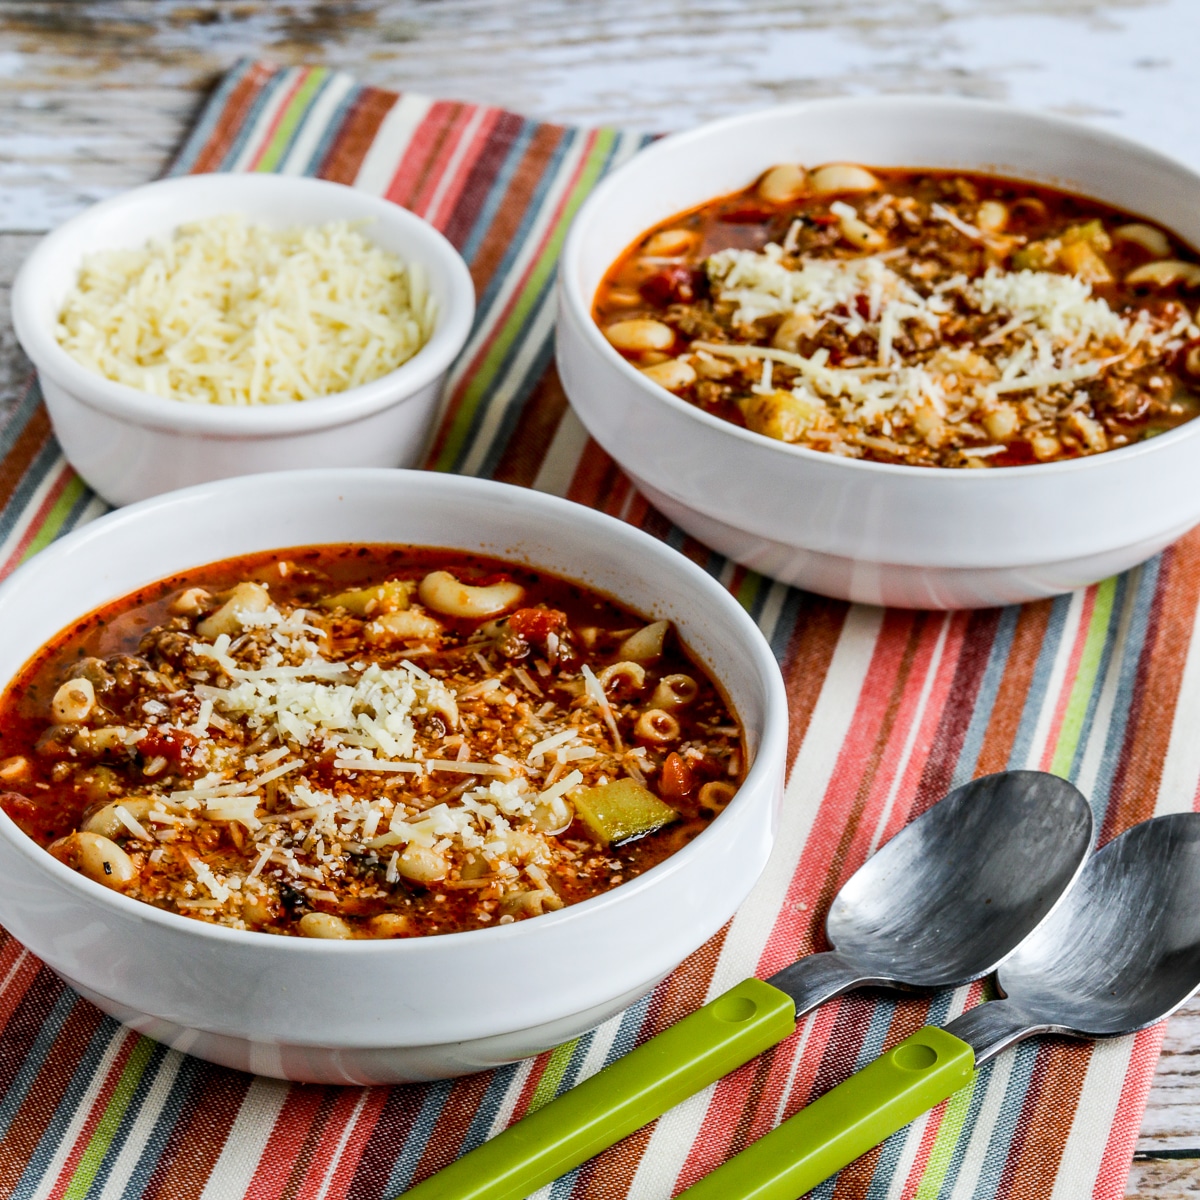 Square image of Italian sausage, zucchini and pasta soup with soup in two bowls, striped napkin, spoons and Parmesan cheese.